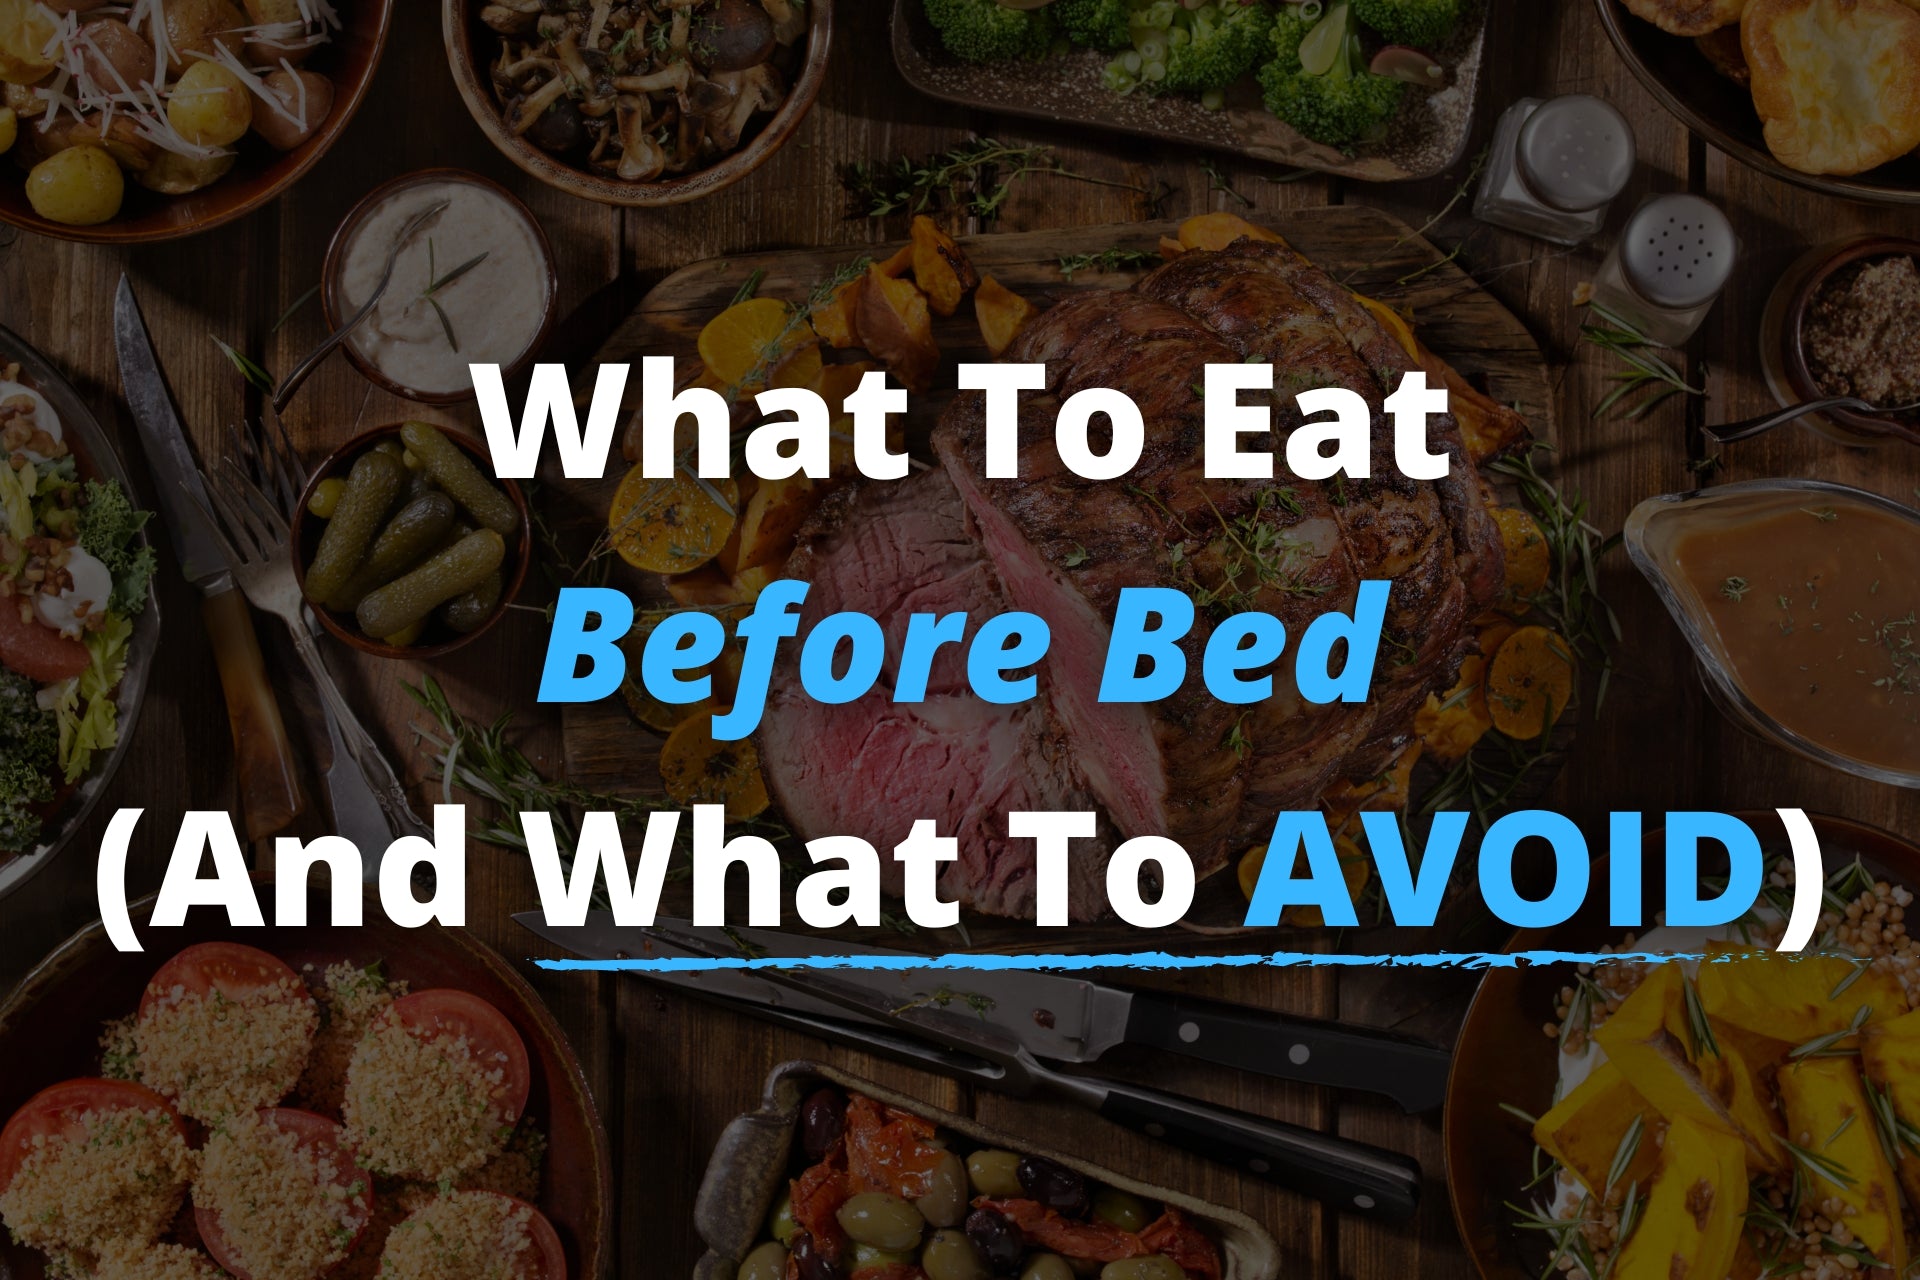 What to Eat Before Bed (and What to Avoid) For Sleep